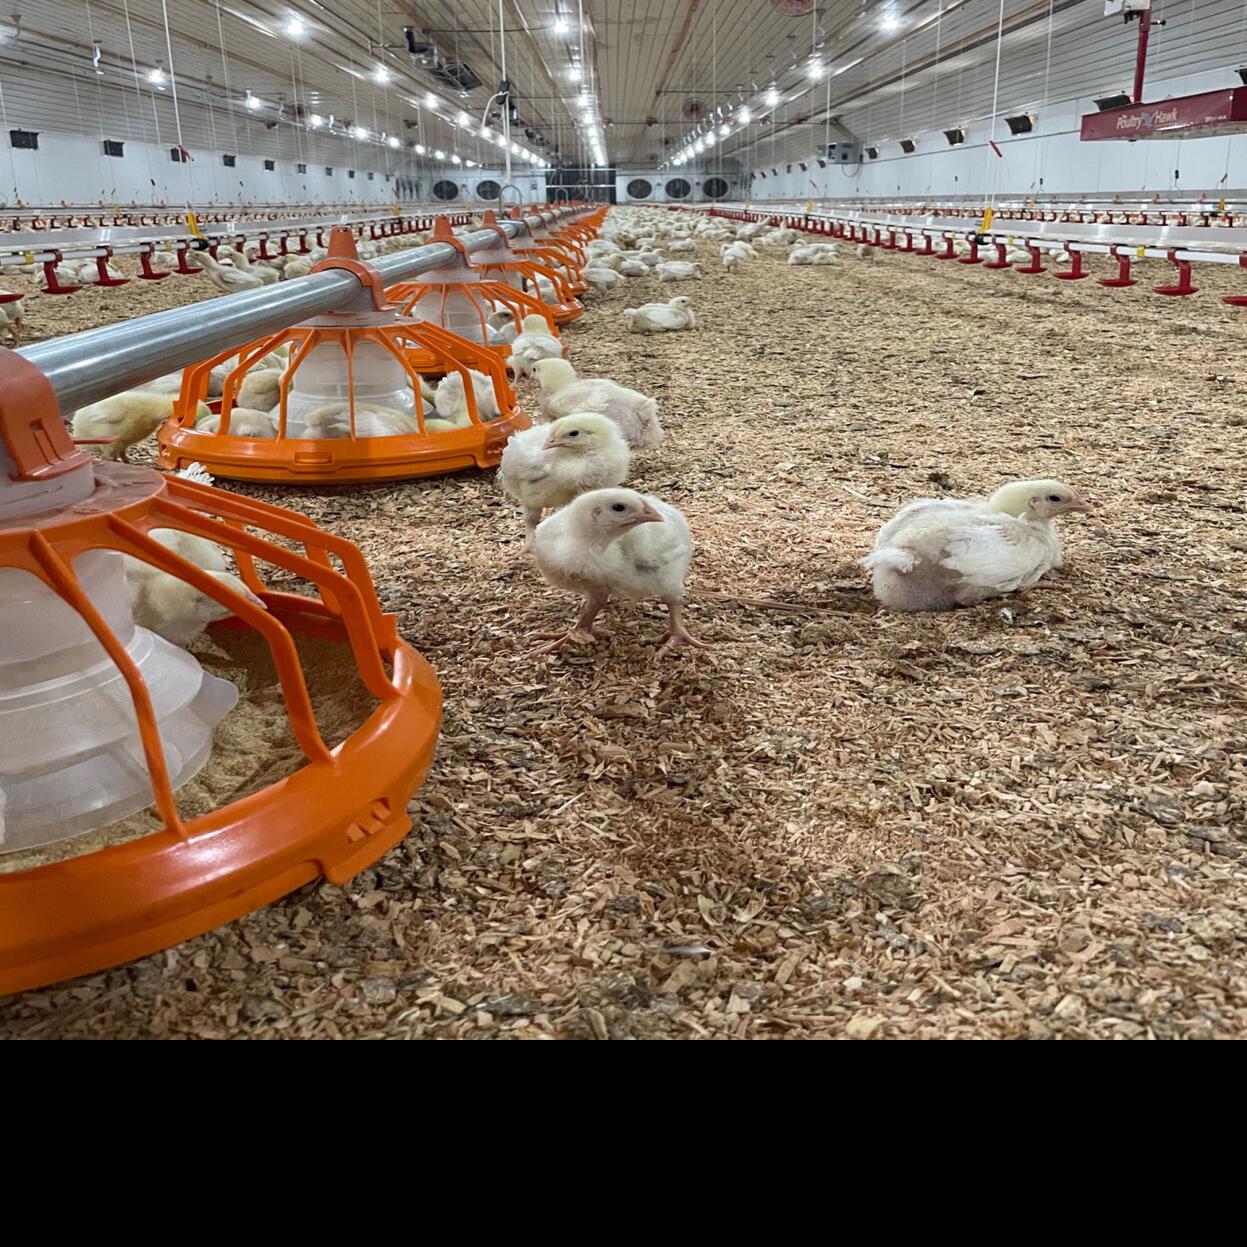 Large chicken farms raise concerns in rural Oregon